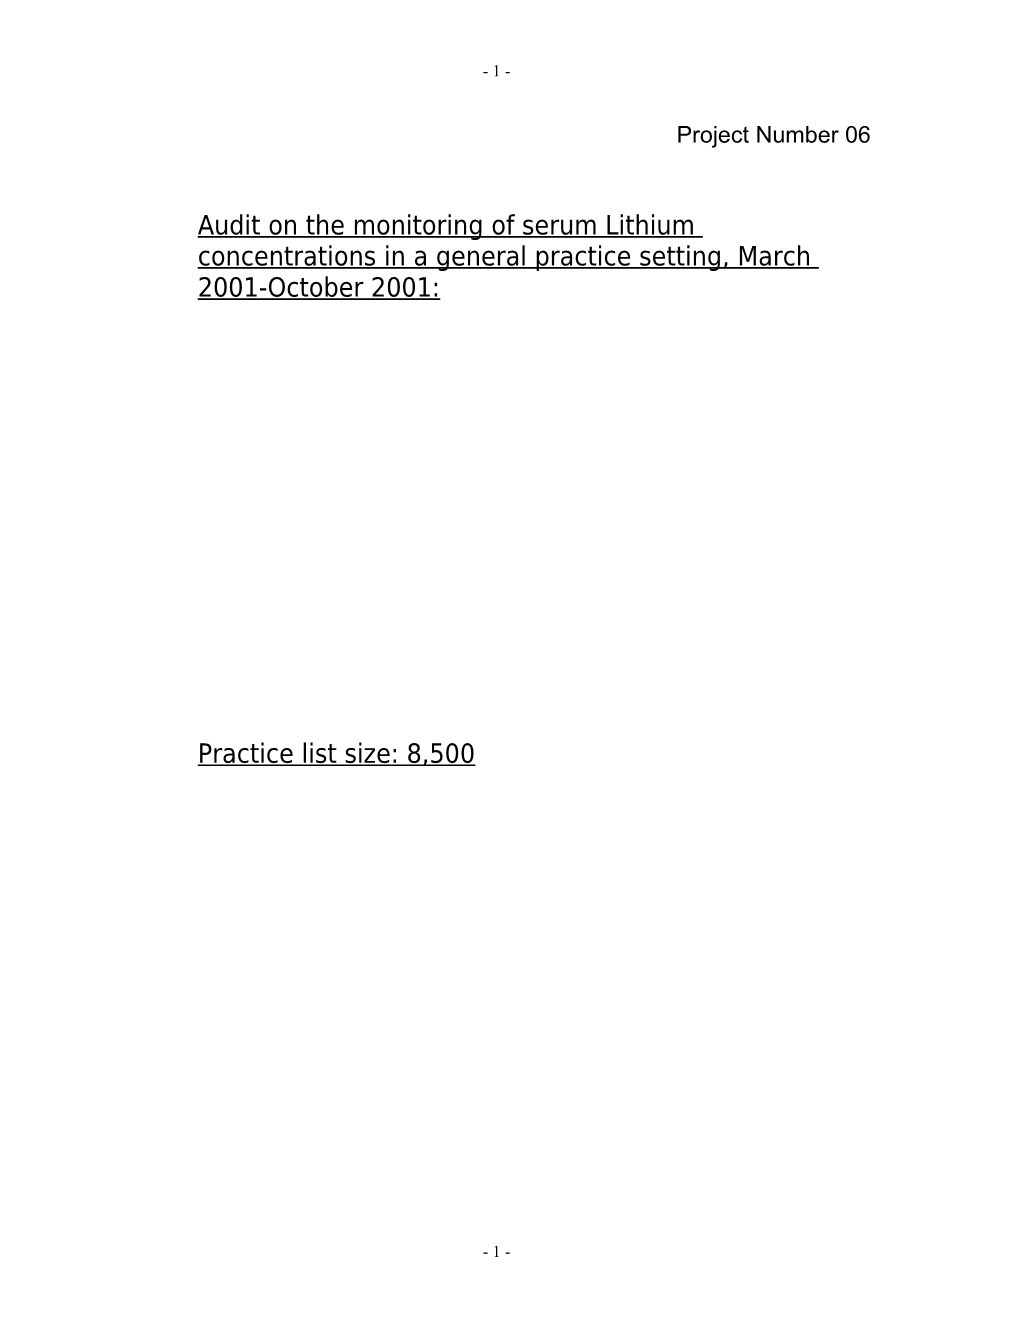 Audit on the Monitoring of Serum Lithium Concentrations in a General Practice Setting